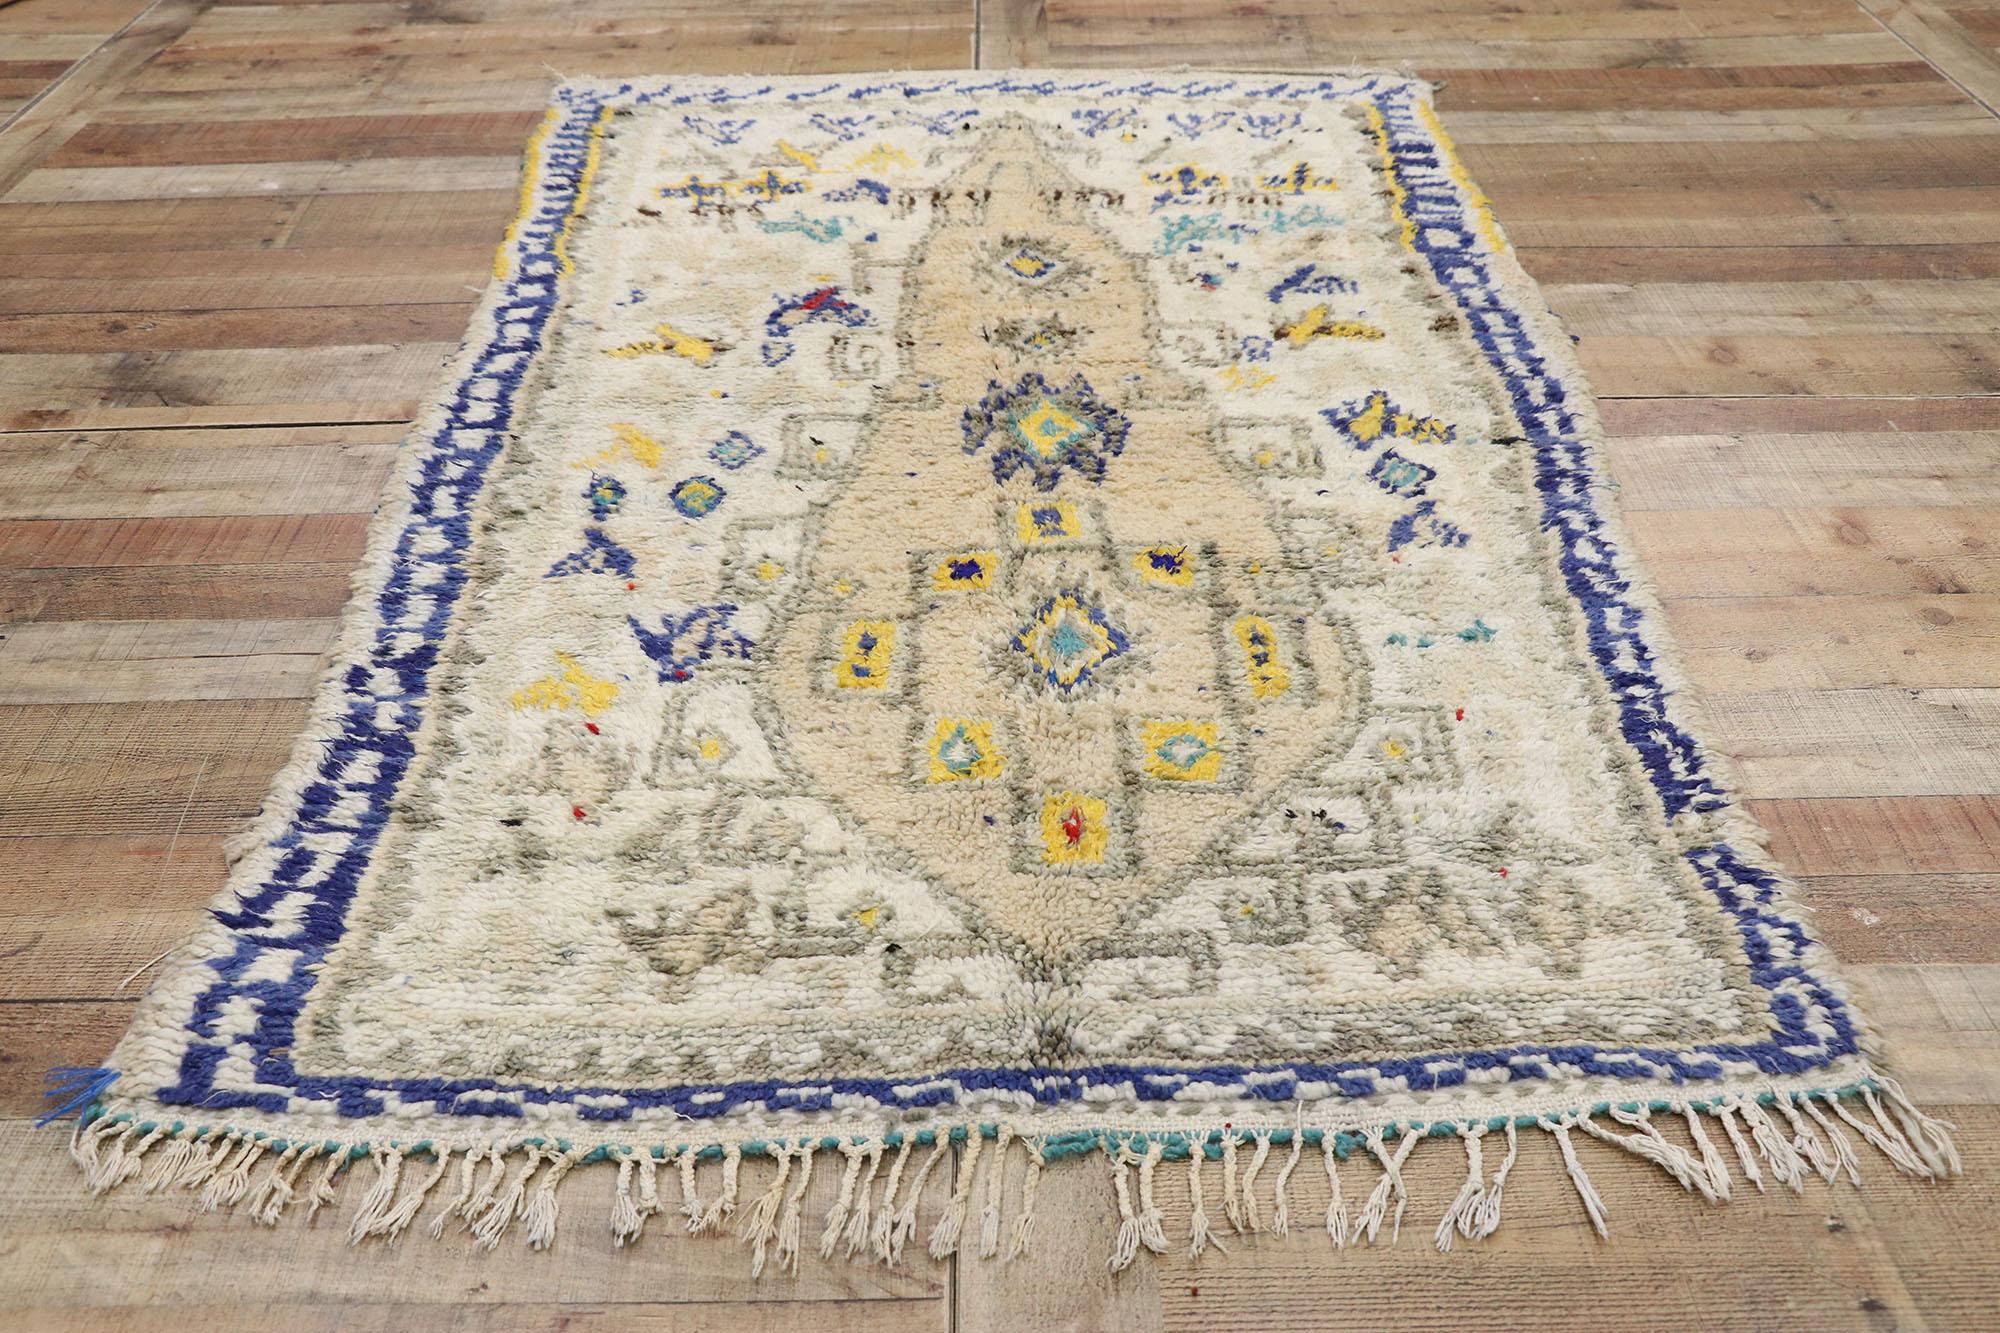 Wool Vintage Berber Moroccan Azilal Rug with Boho Chic Hygge Style and Memphis Design For Sale